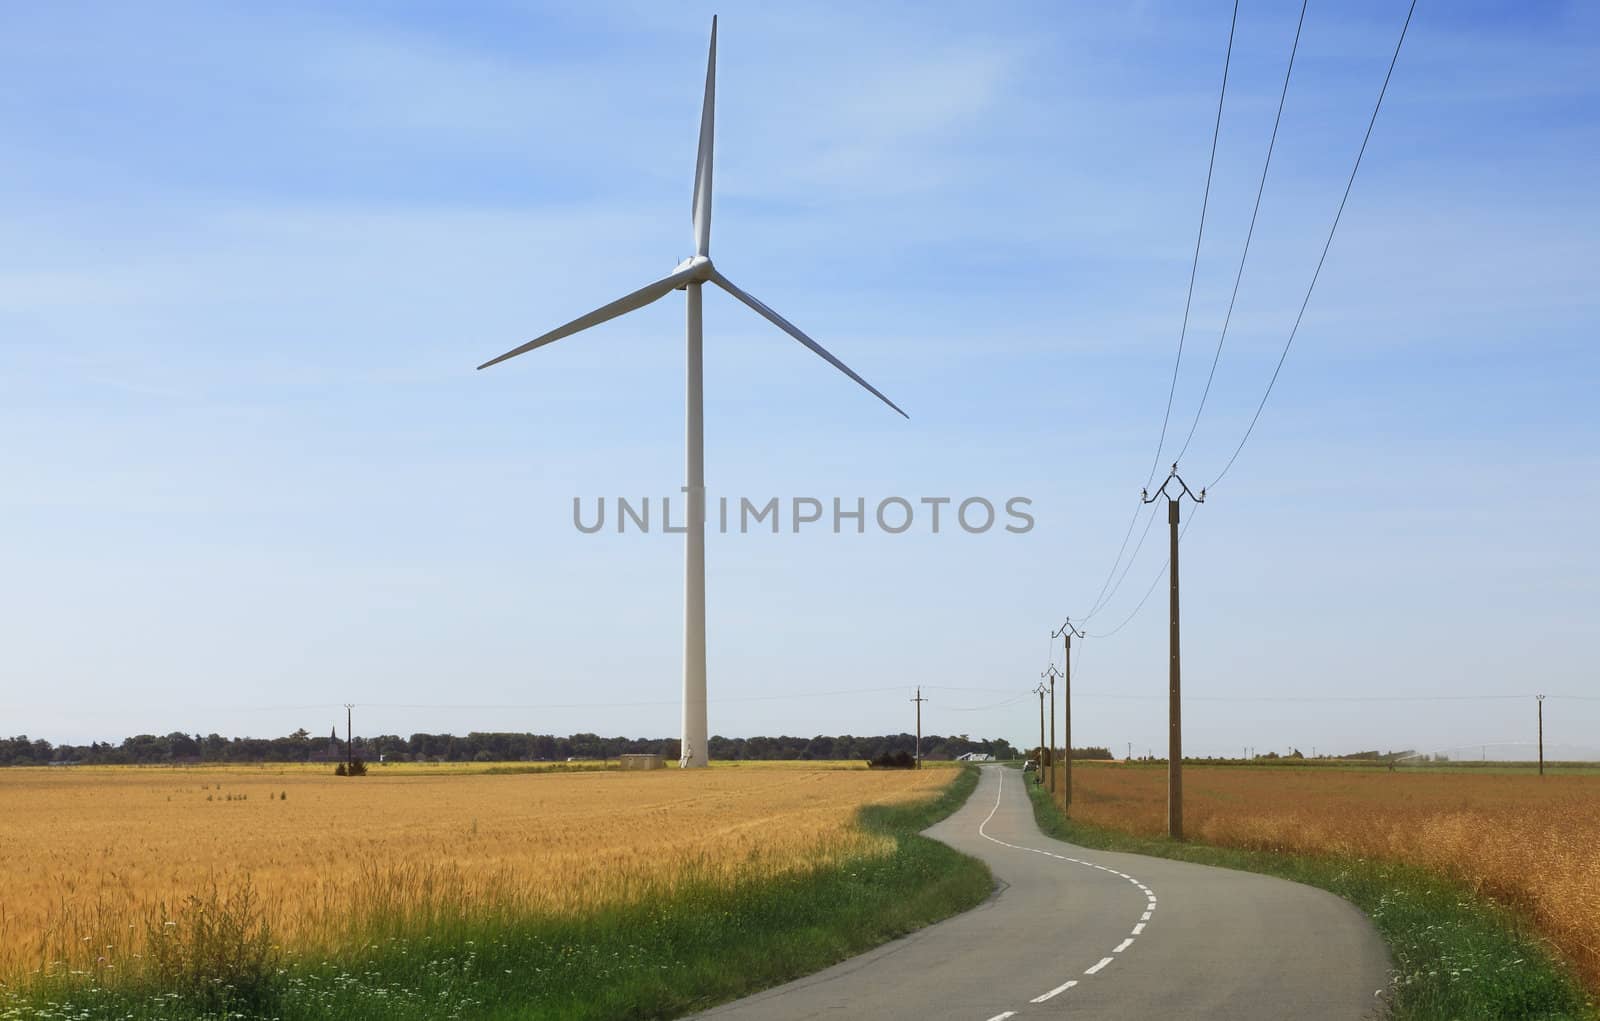 Image of a road in a field area with a row of electricity poles at the right side and a wind turbine at the left side.